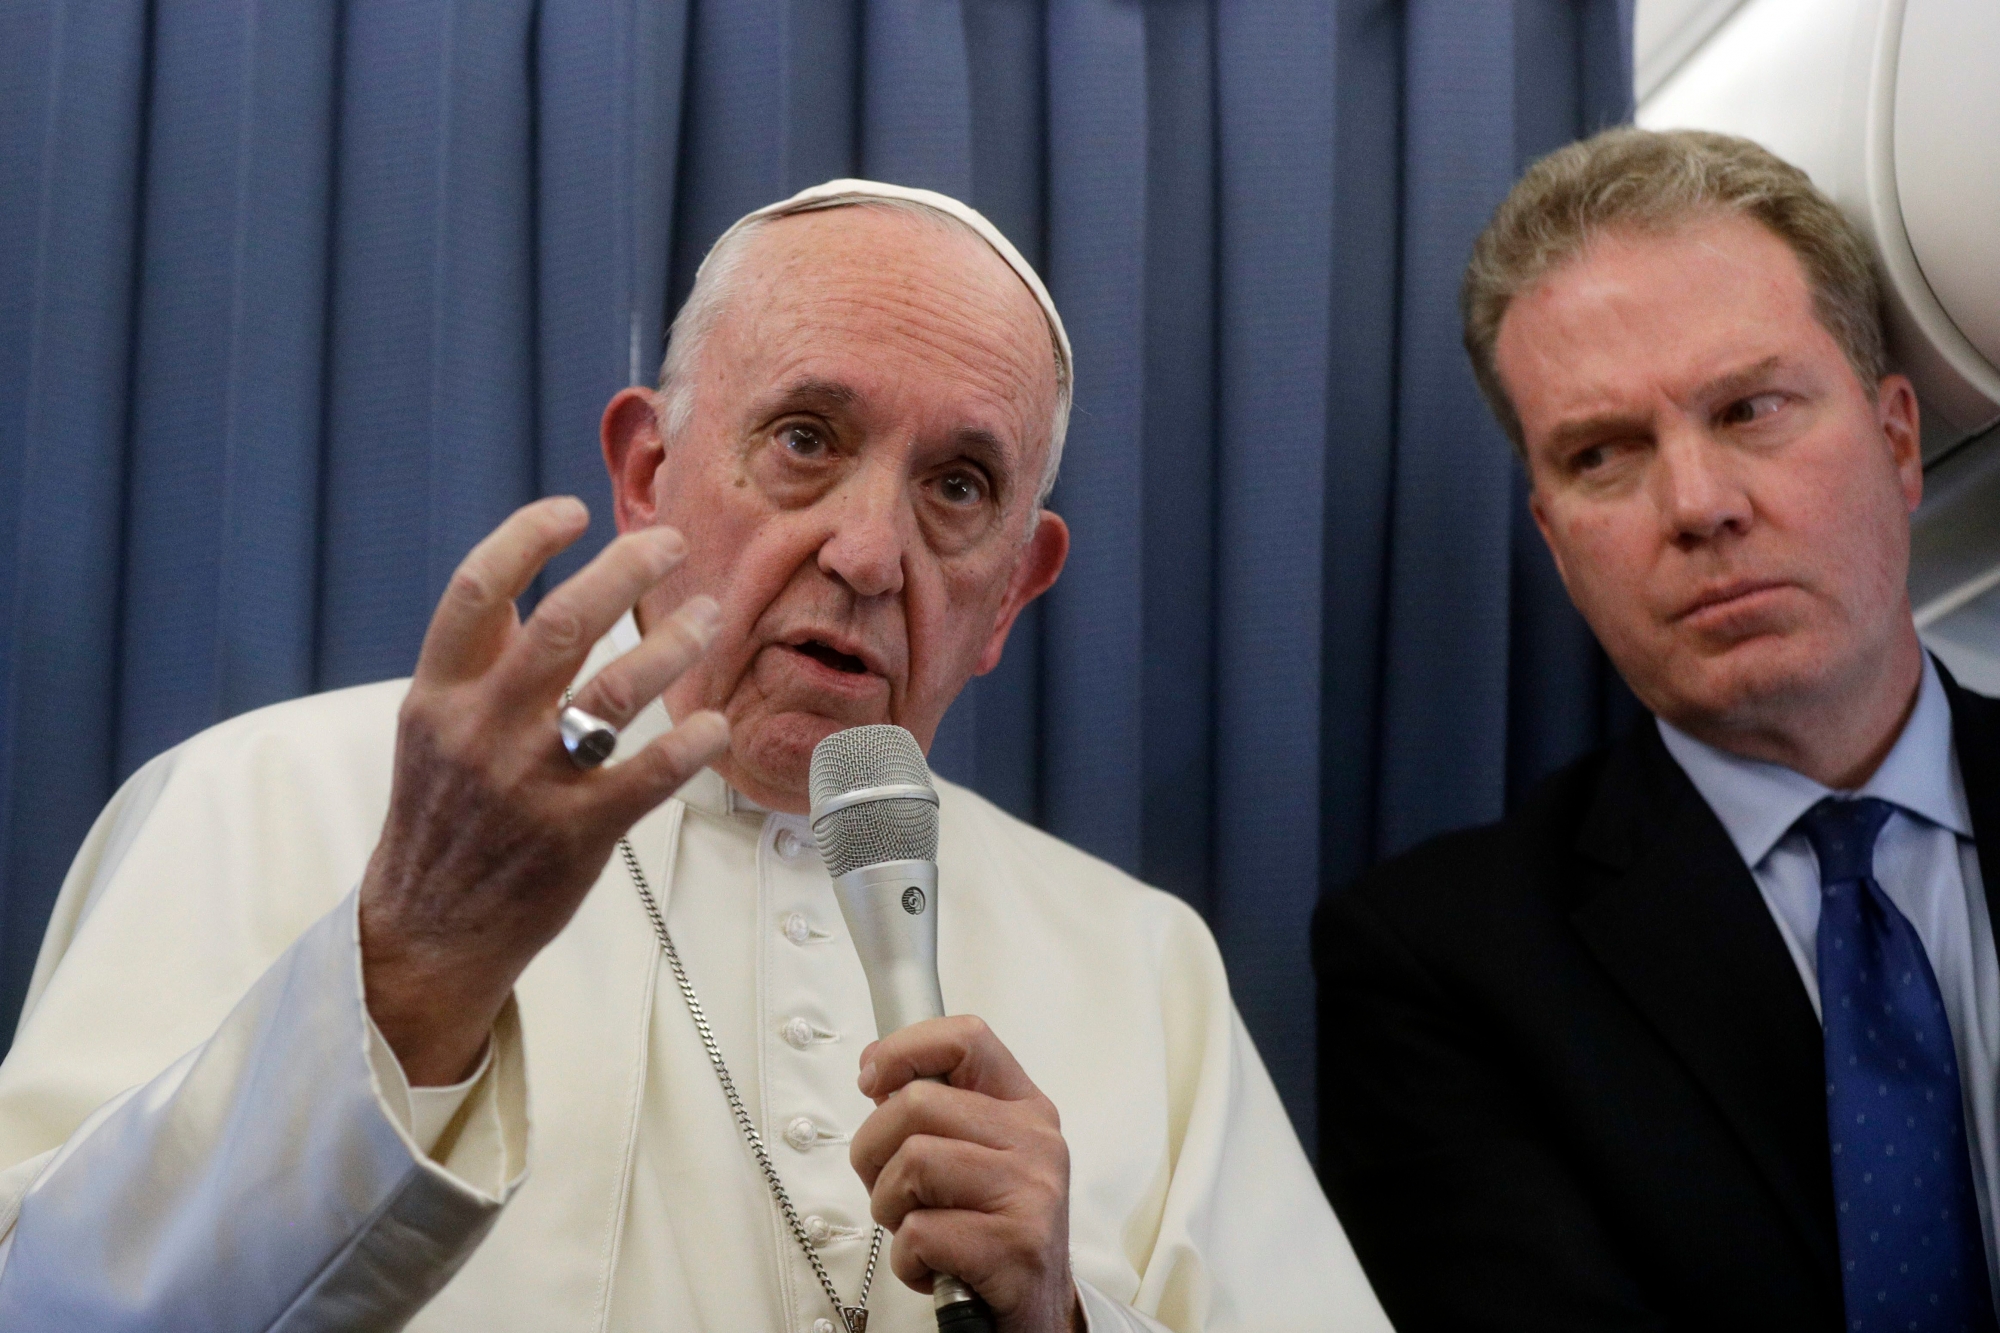 Pope Francis, flanked by Vatican spokesperson Greg Burke, listens to a journalist's question during a press conference aboard of the flight to Rome at the end of his two-day visit to Ireland, Sunday, Aug. 26, 2018. (AP Photo/Gregorio Borgia, Pool) Ireland Pope